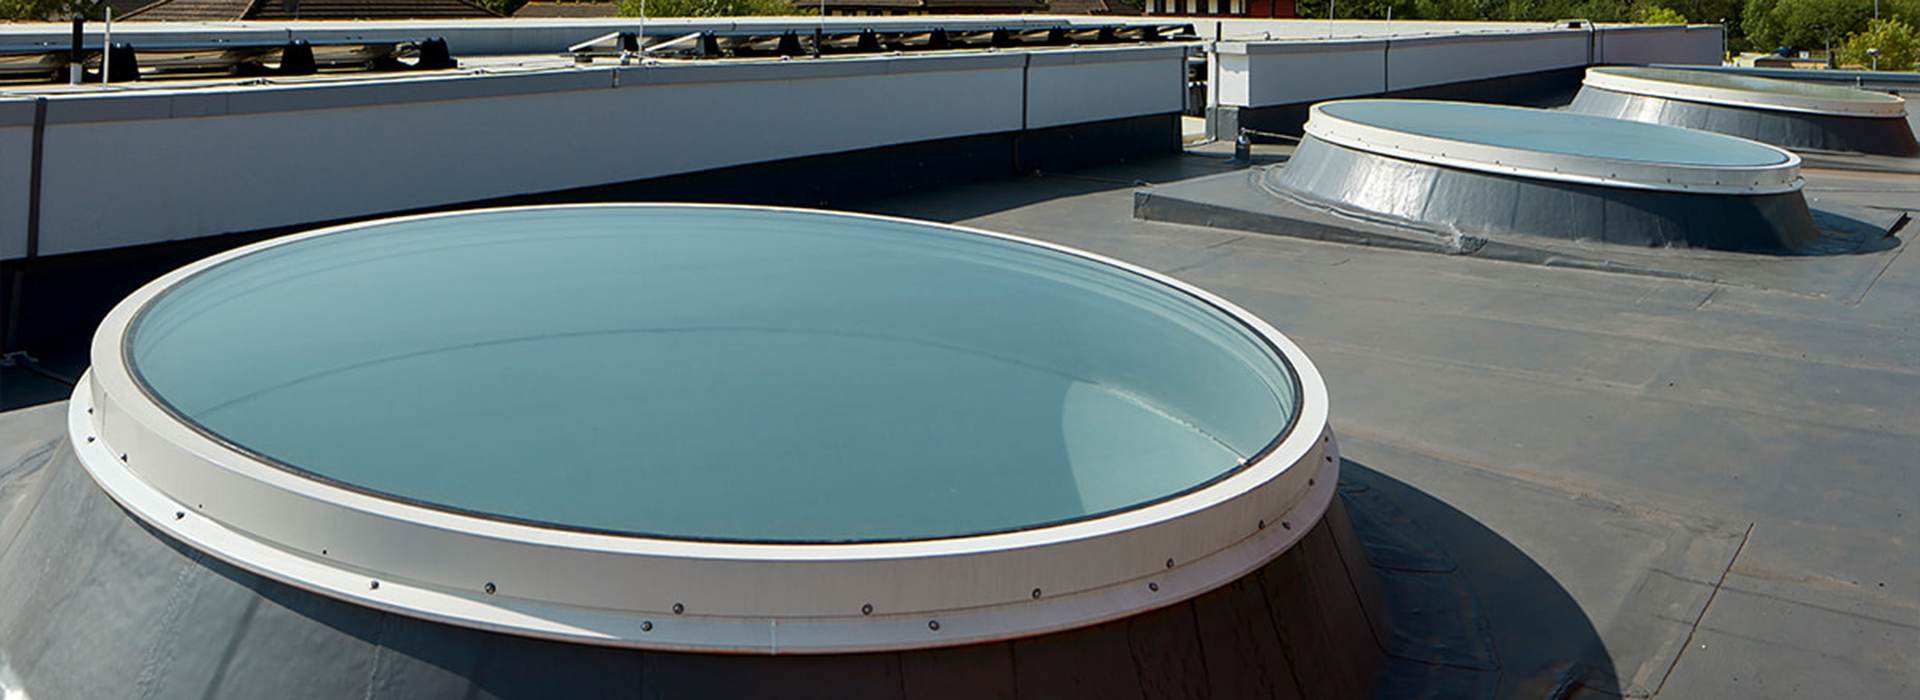 3 Circular glass rooflights on a roof